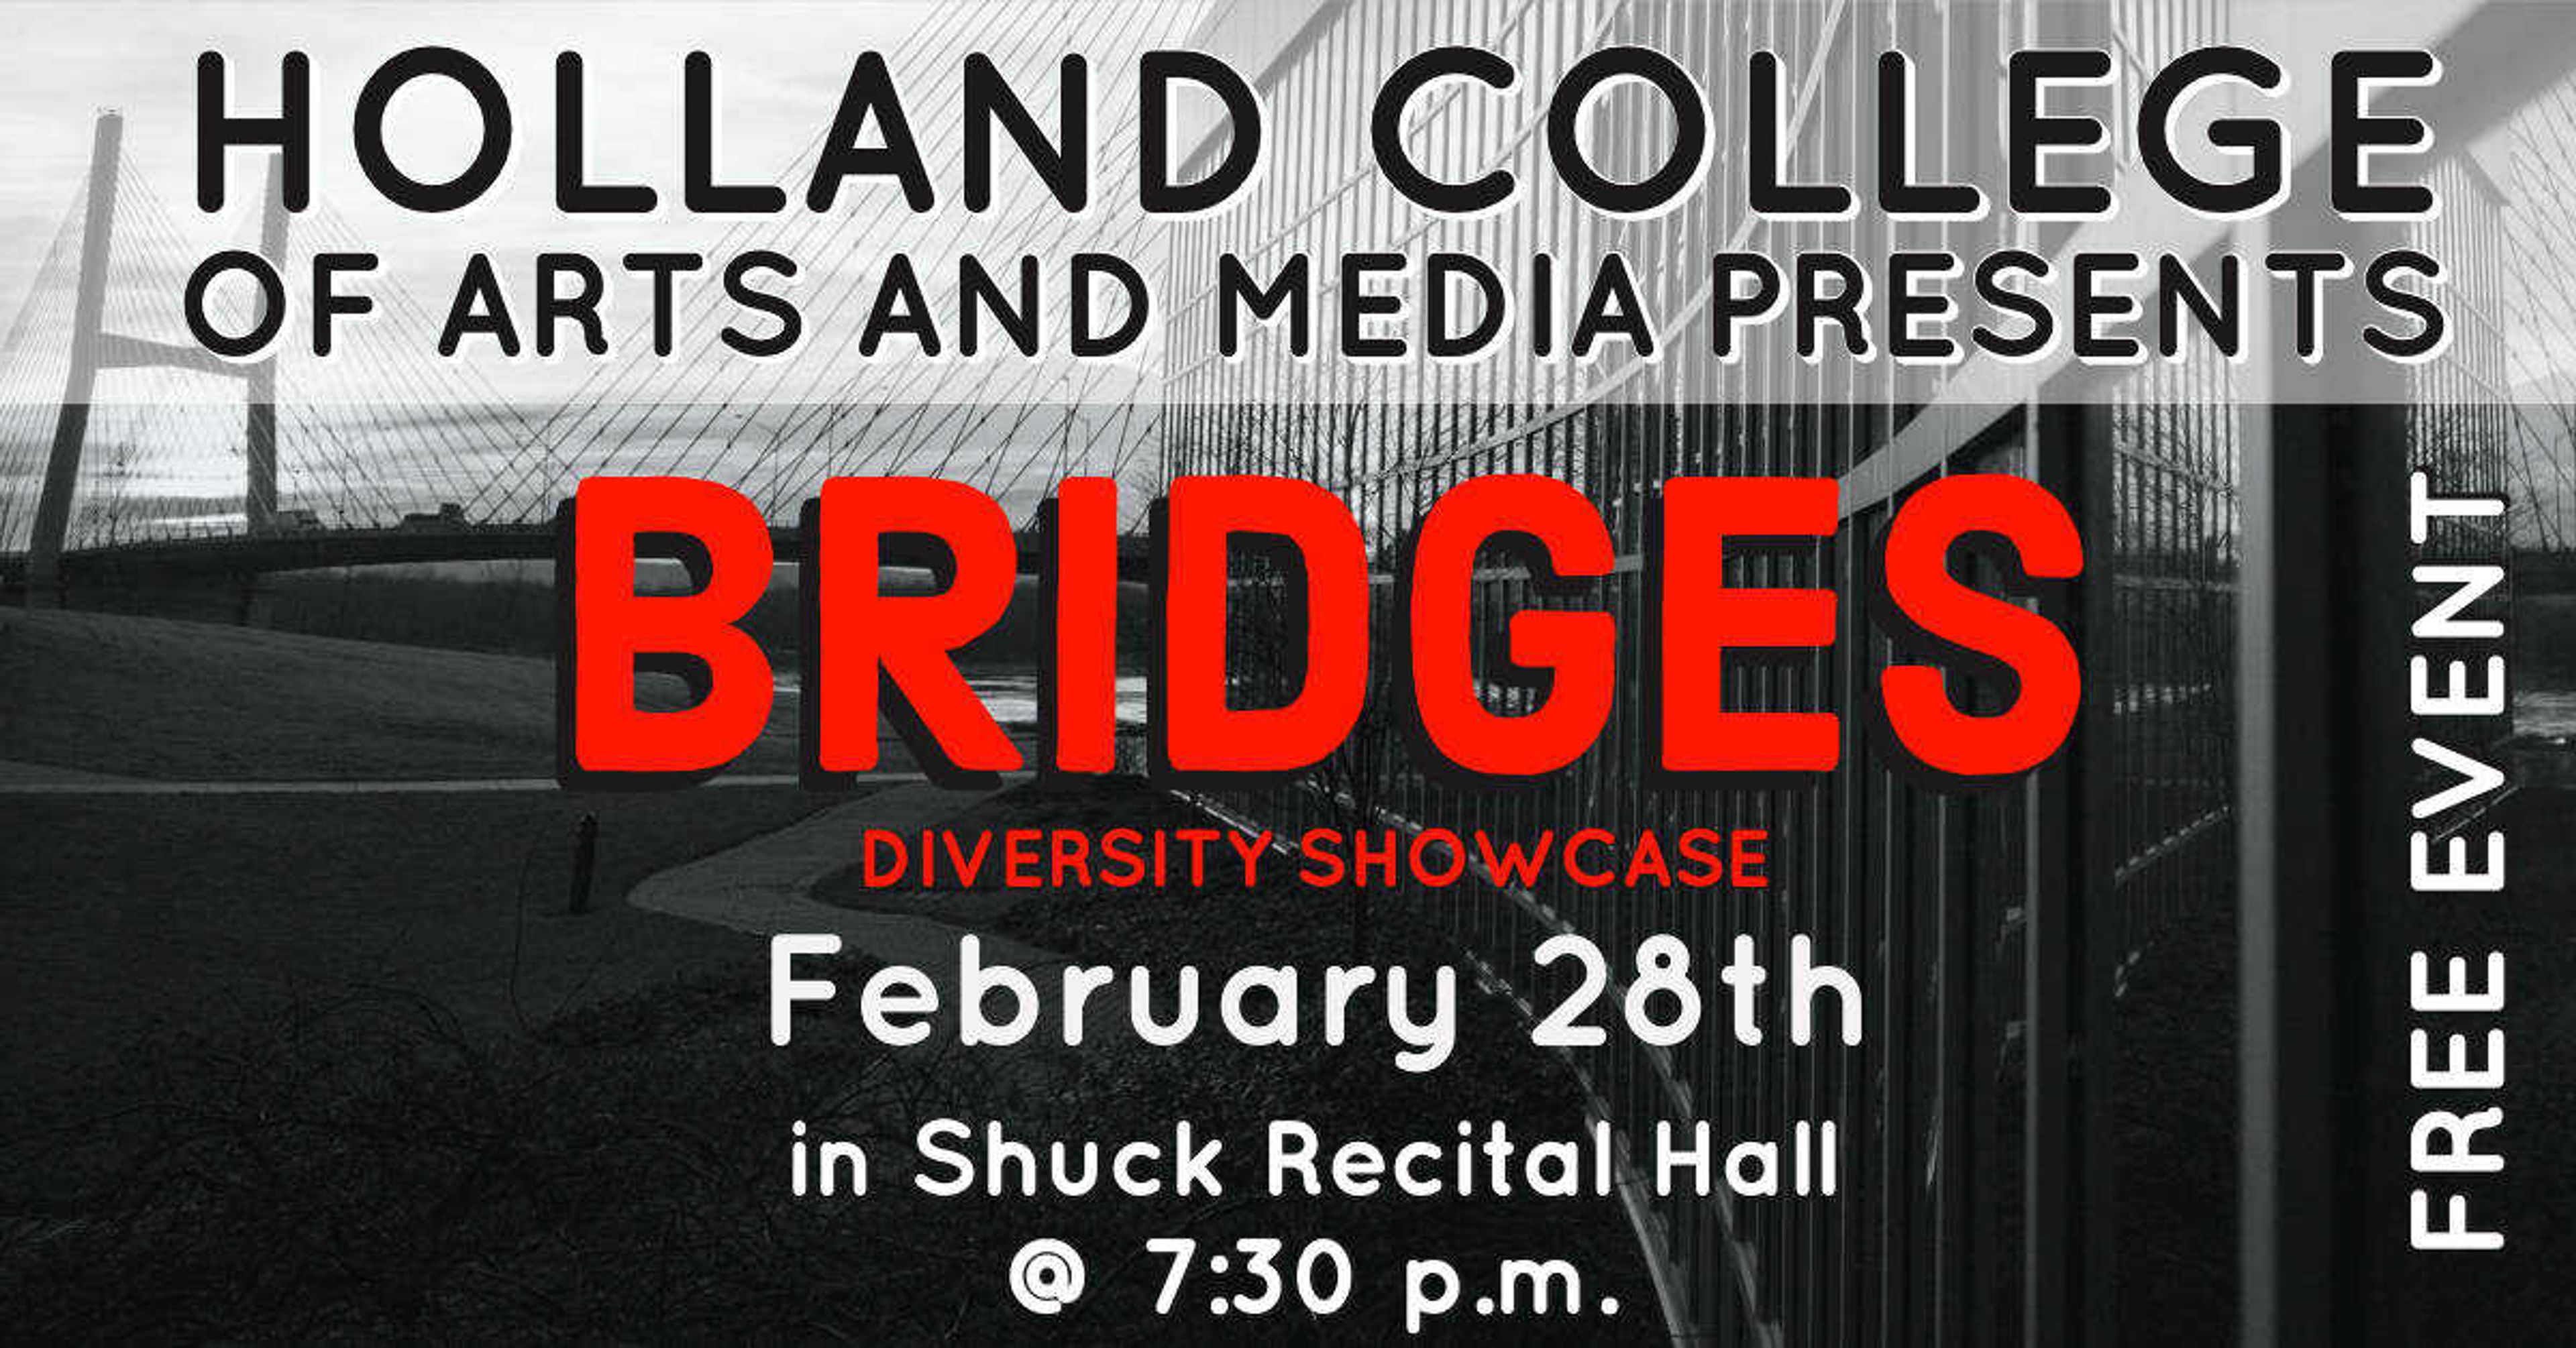 Holland College of Arts and Media bridging diversity